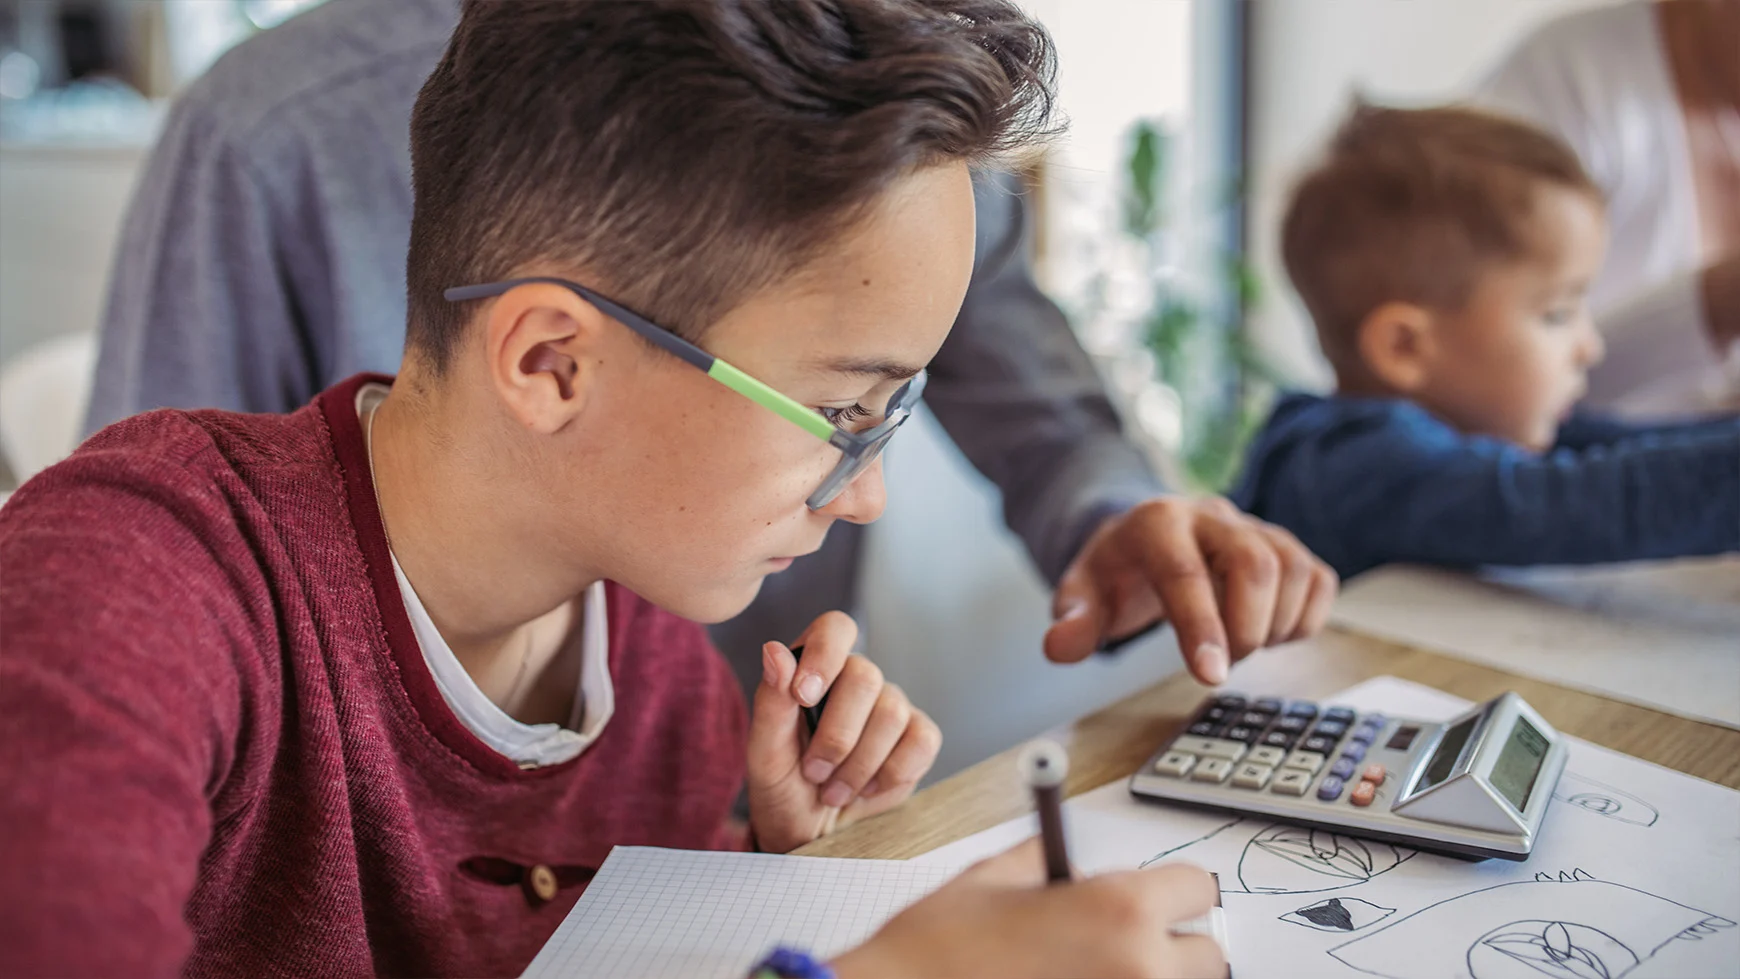 A parent uses a calculator next to their child, who wears glasses and does math homework with a pencil. 